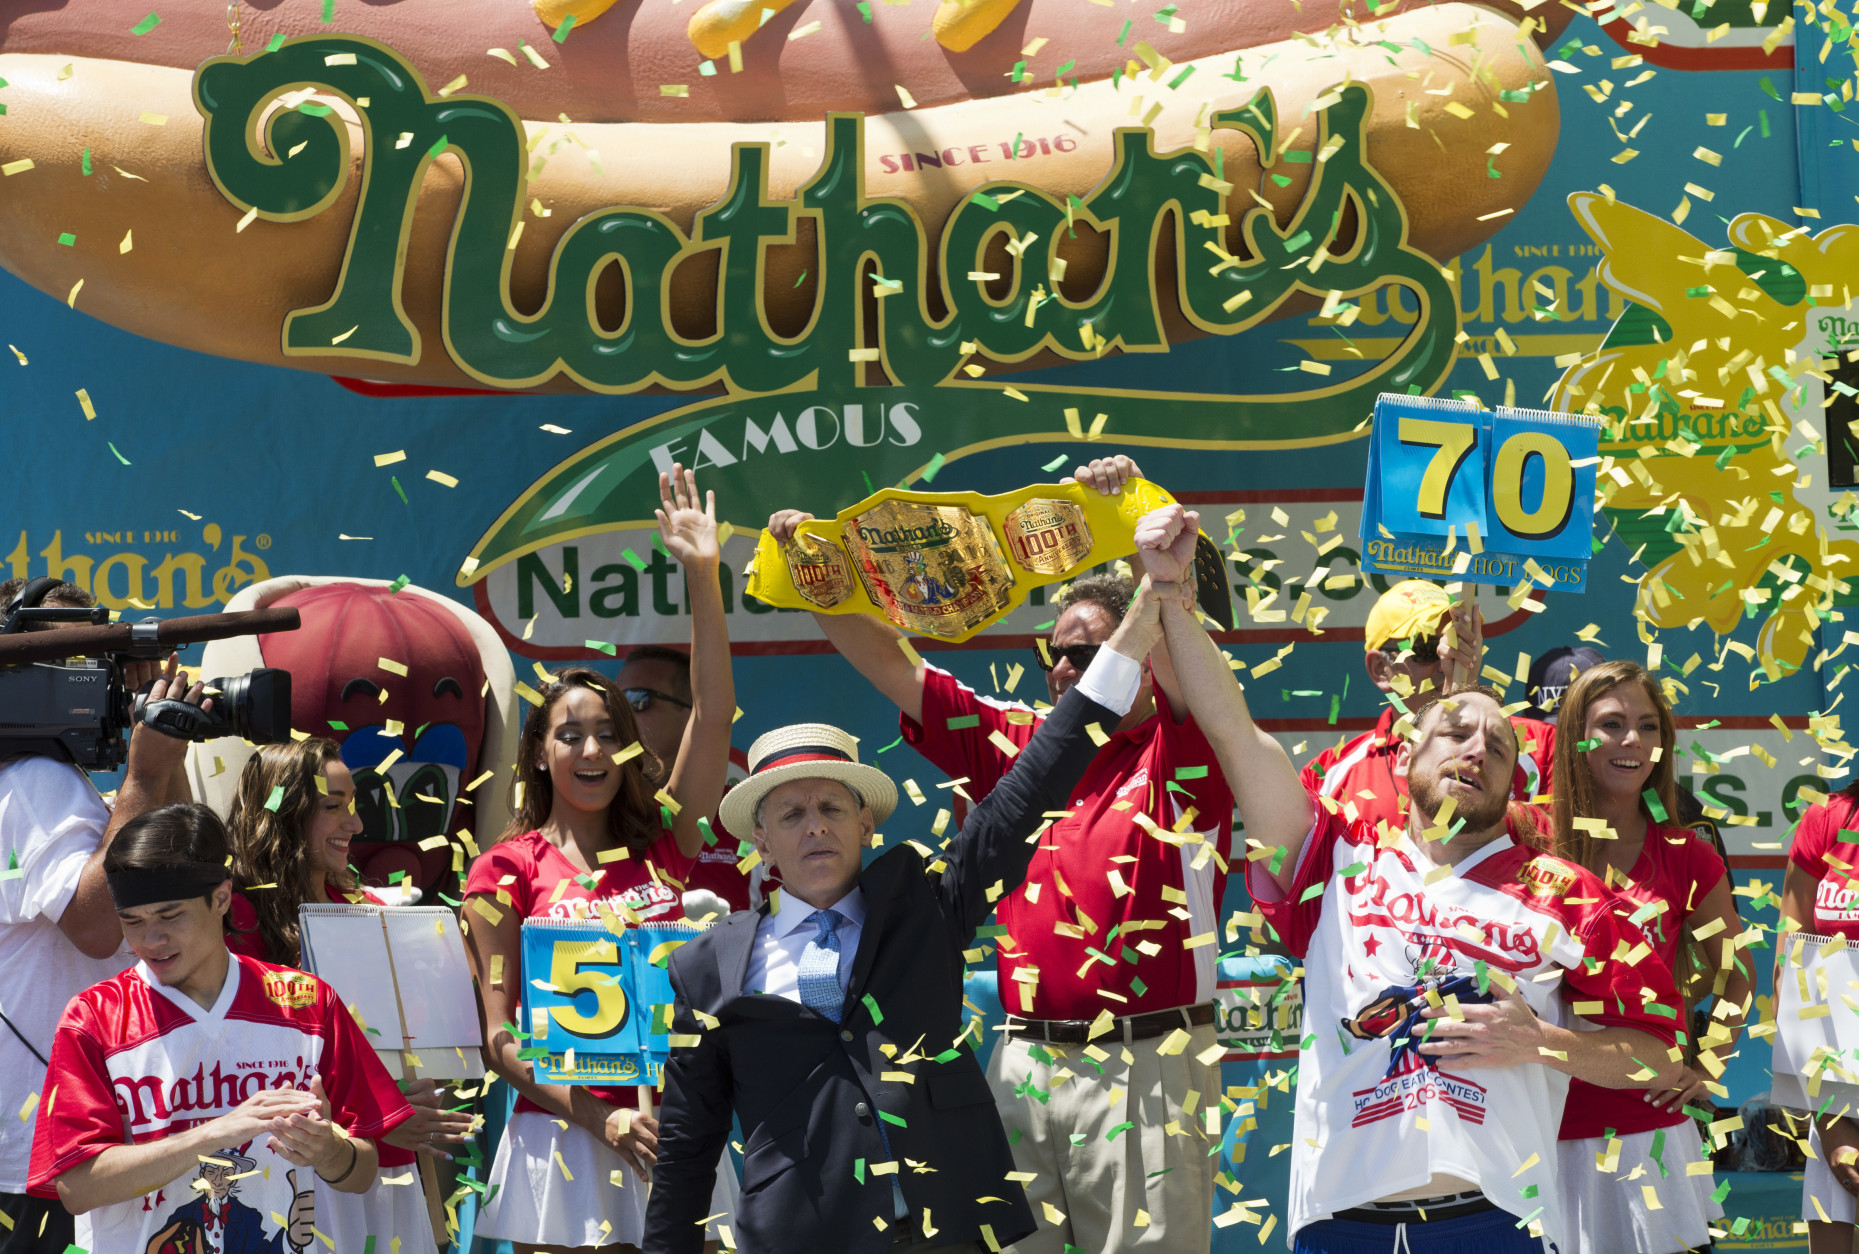 Joey Chestnut, right, is declared Nathan's Famous Fourth of July International Hot Dog Eating Contest men's competition winner, Monday, July 4, 2016, in New York. Chestnut came in first eating 70 hot dogs and buns in 10 minutes. Matt Stonie came in second eating 53 hot dogs and buns in 10 minutes. (AP Photo/Mary Altaffer)